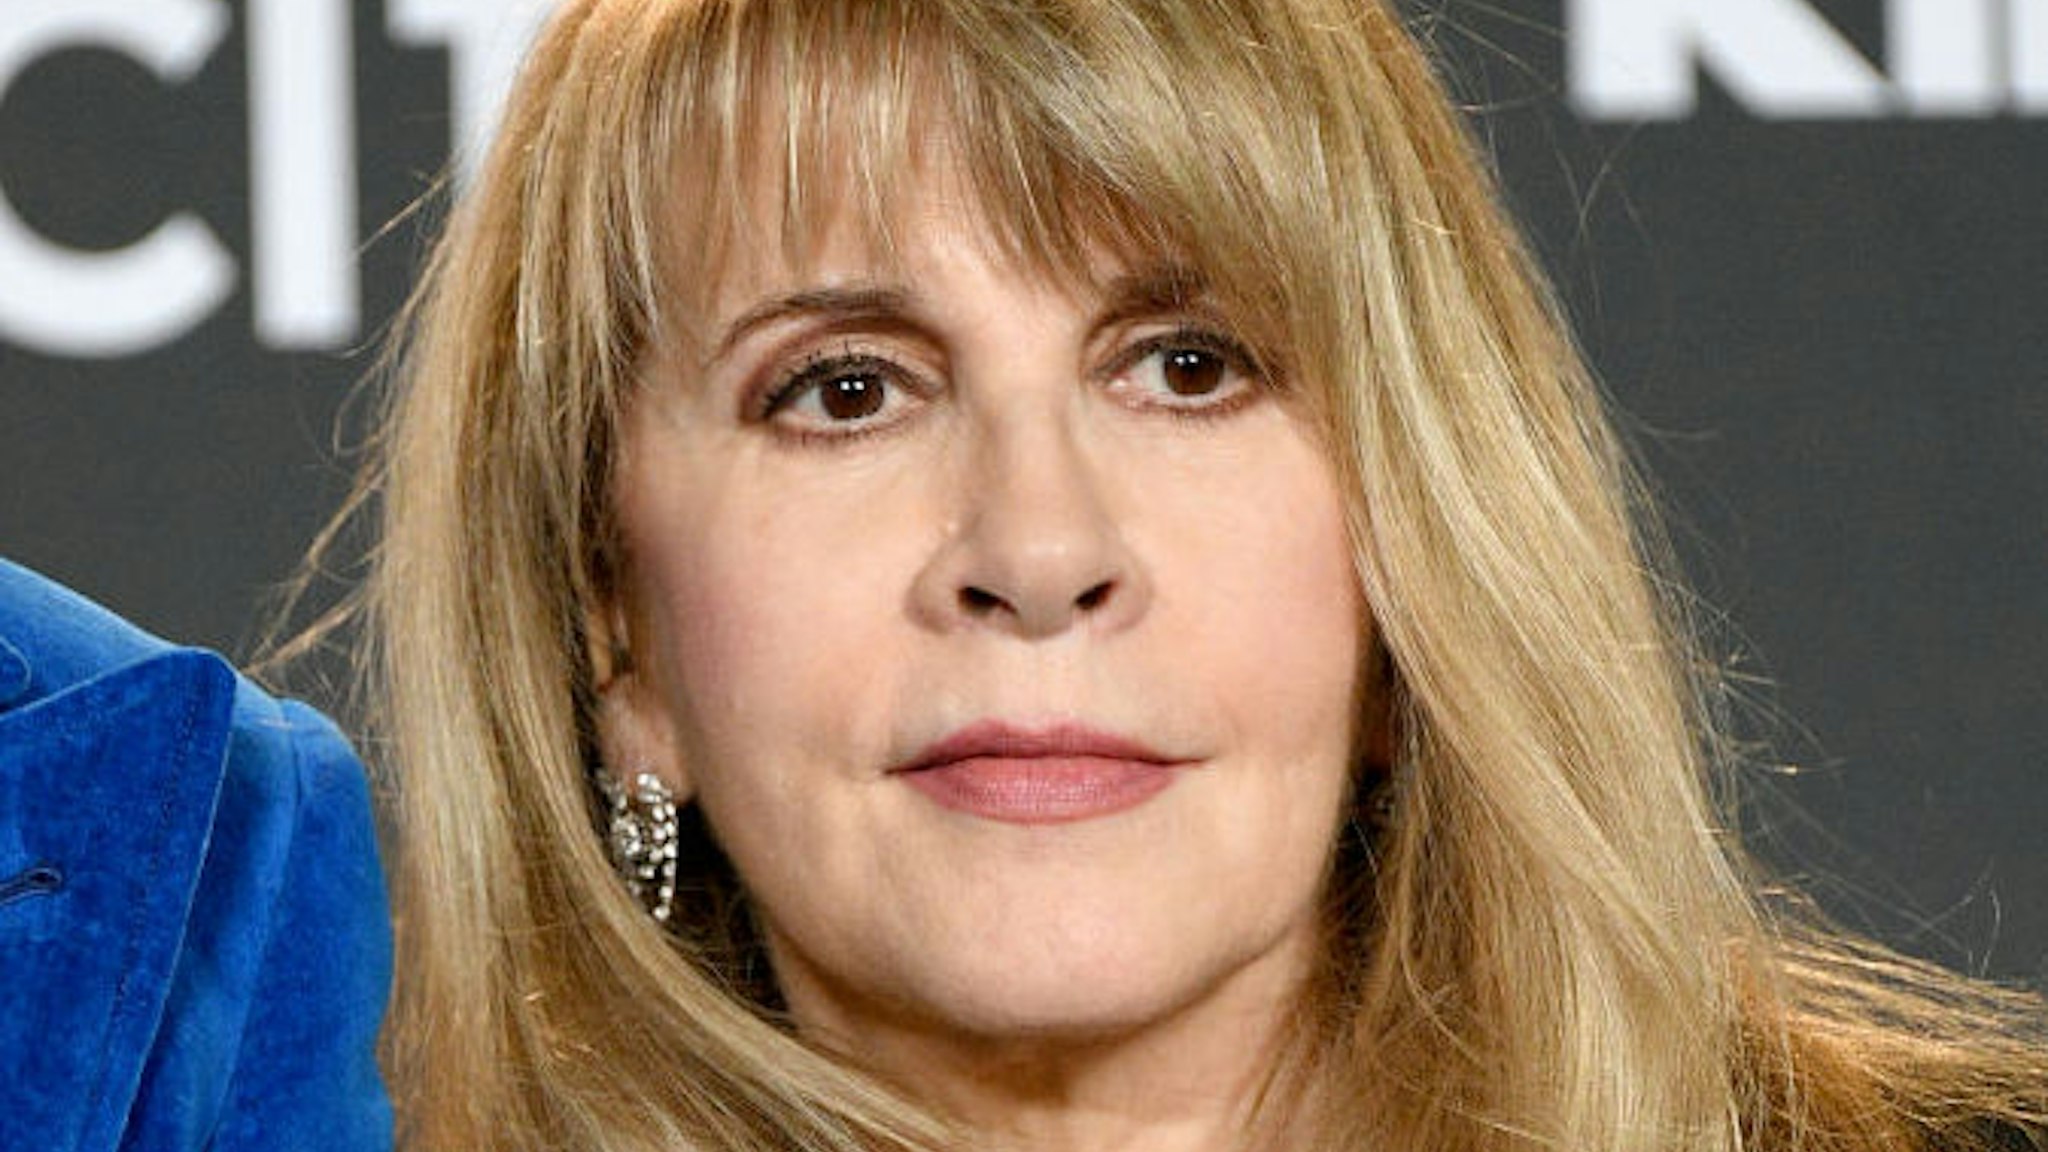 Inductee Stevie Nicks poses in the press room at the 2019 Rock & Roll Hall Of Fame Induction Ceremony - Press Room at Barclays Center on March 29, 2019 in New York City.